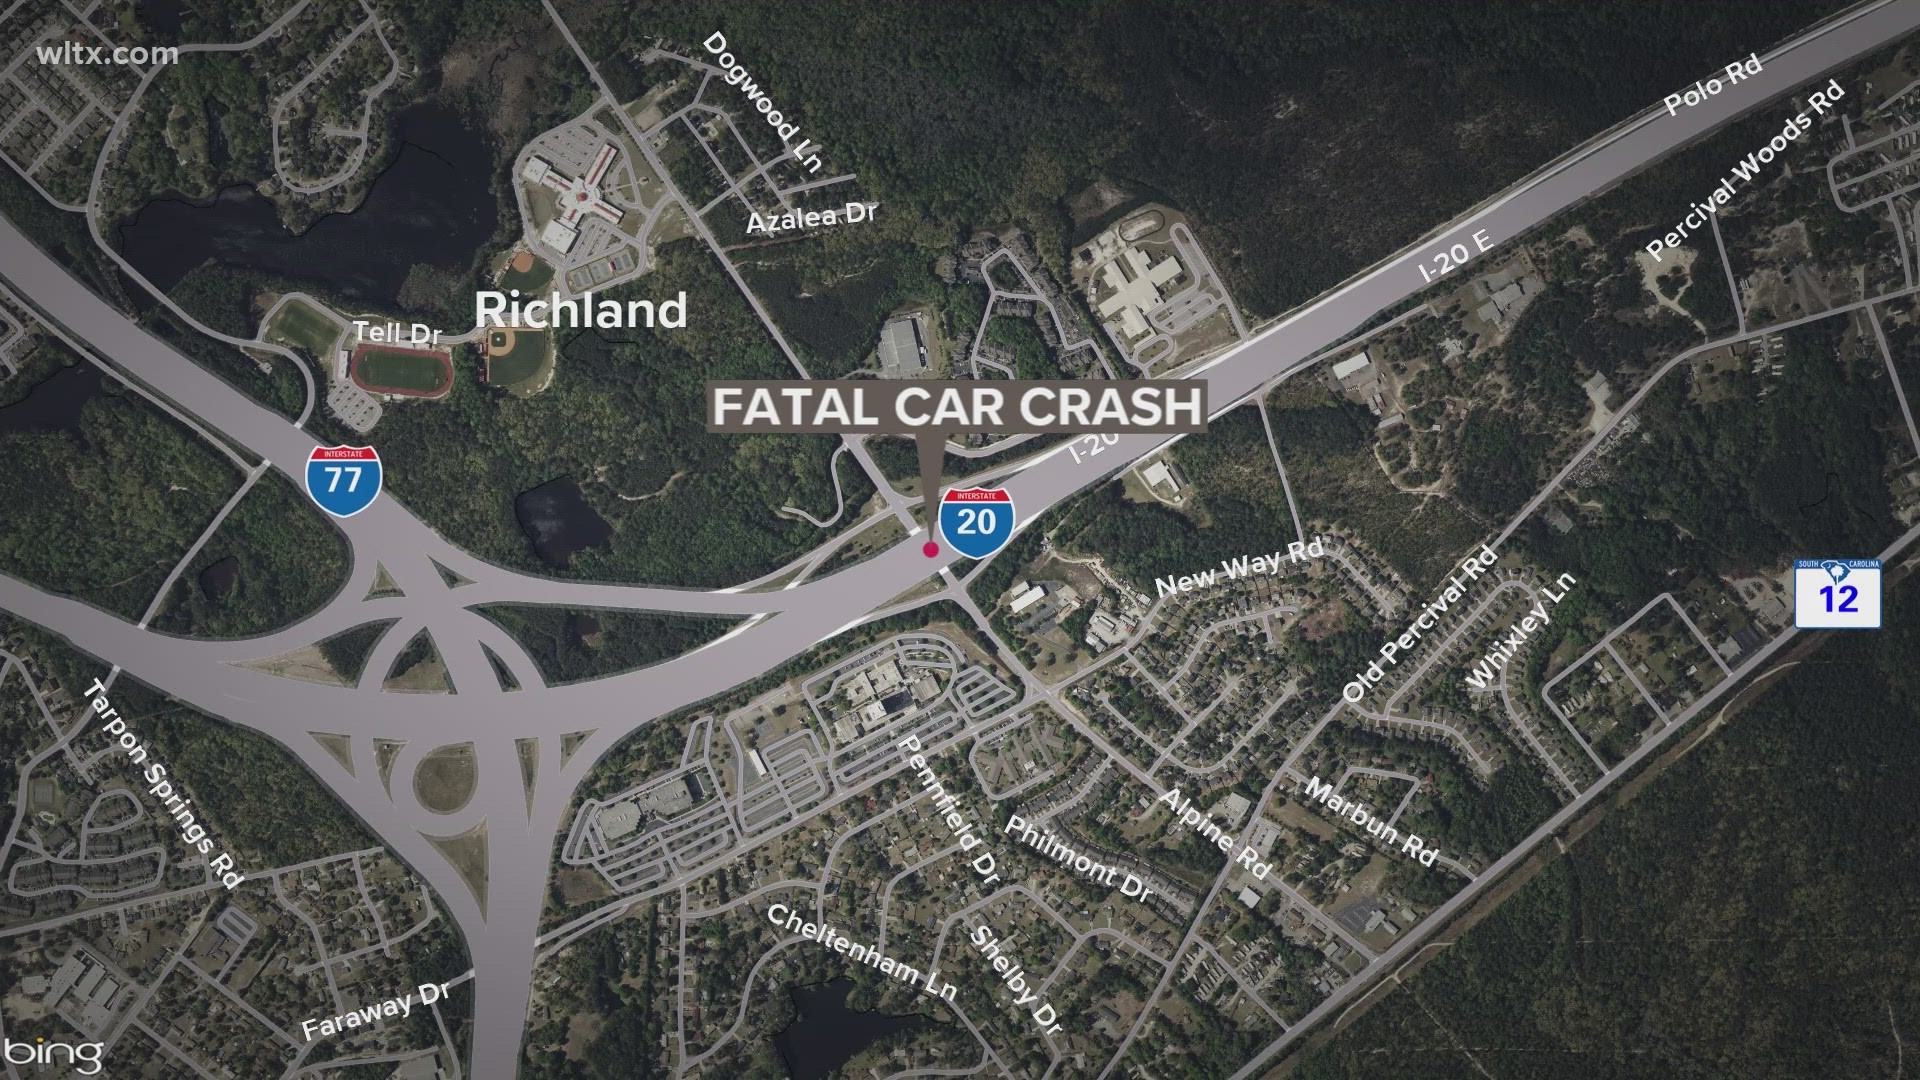 The crash happened around 2:10 a.m. near mile-marker 76 - not far from the exits to I-77.